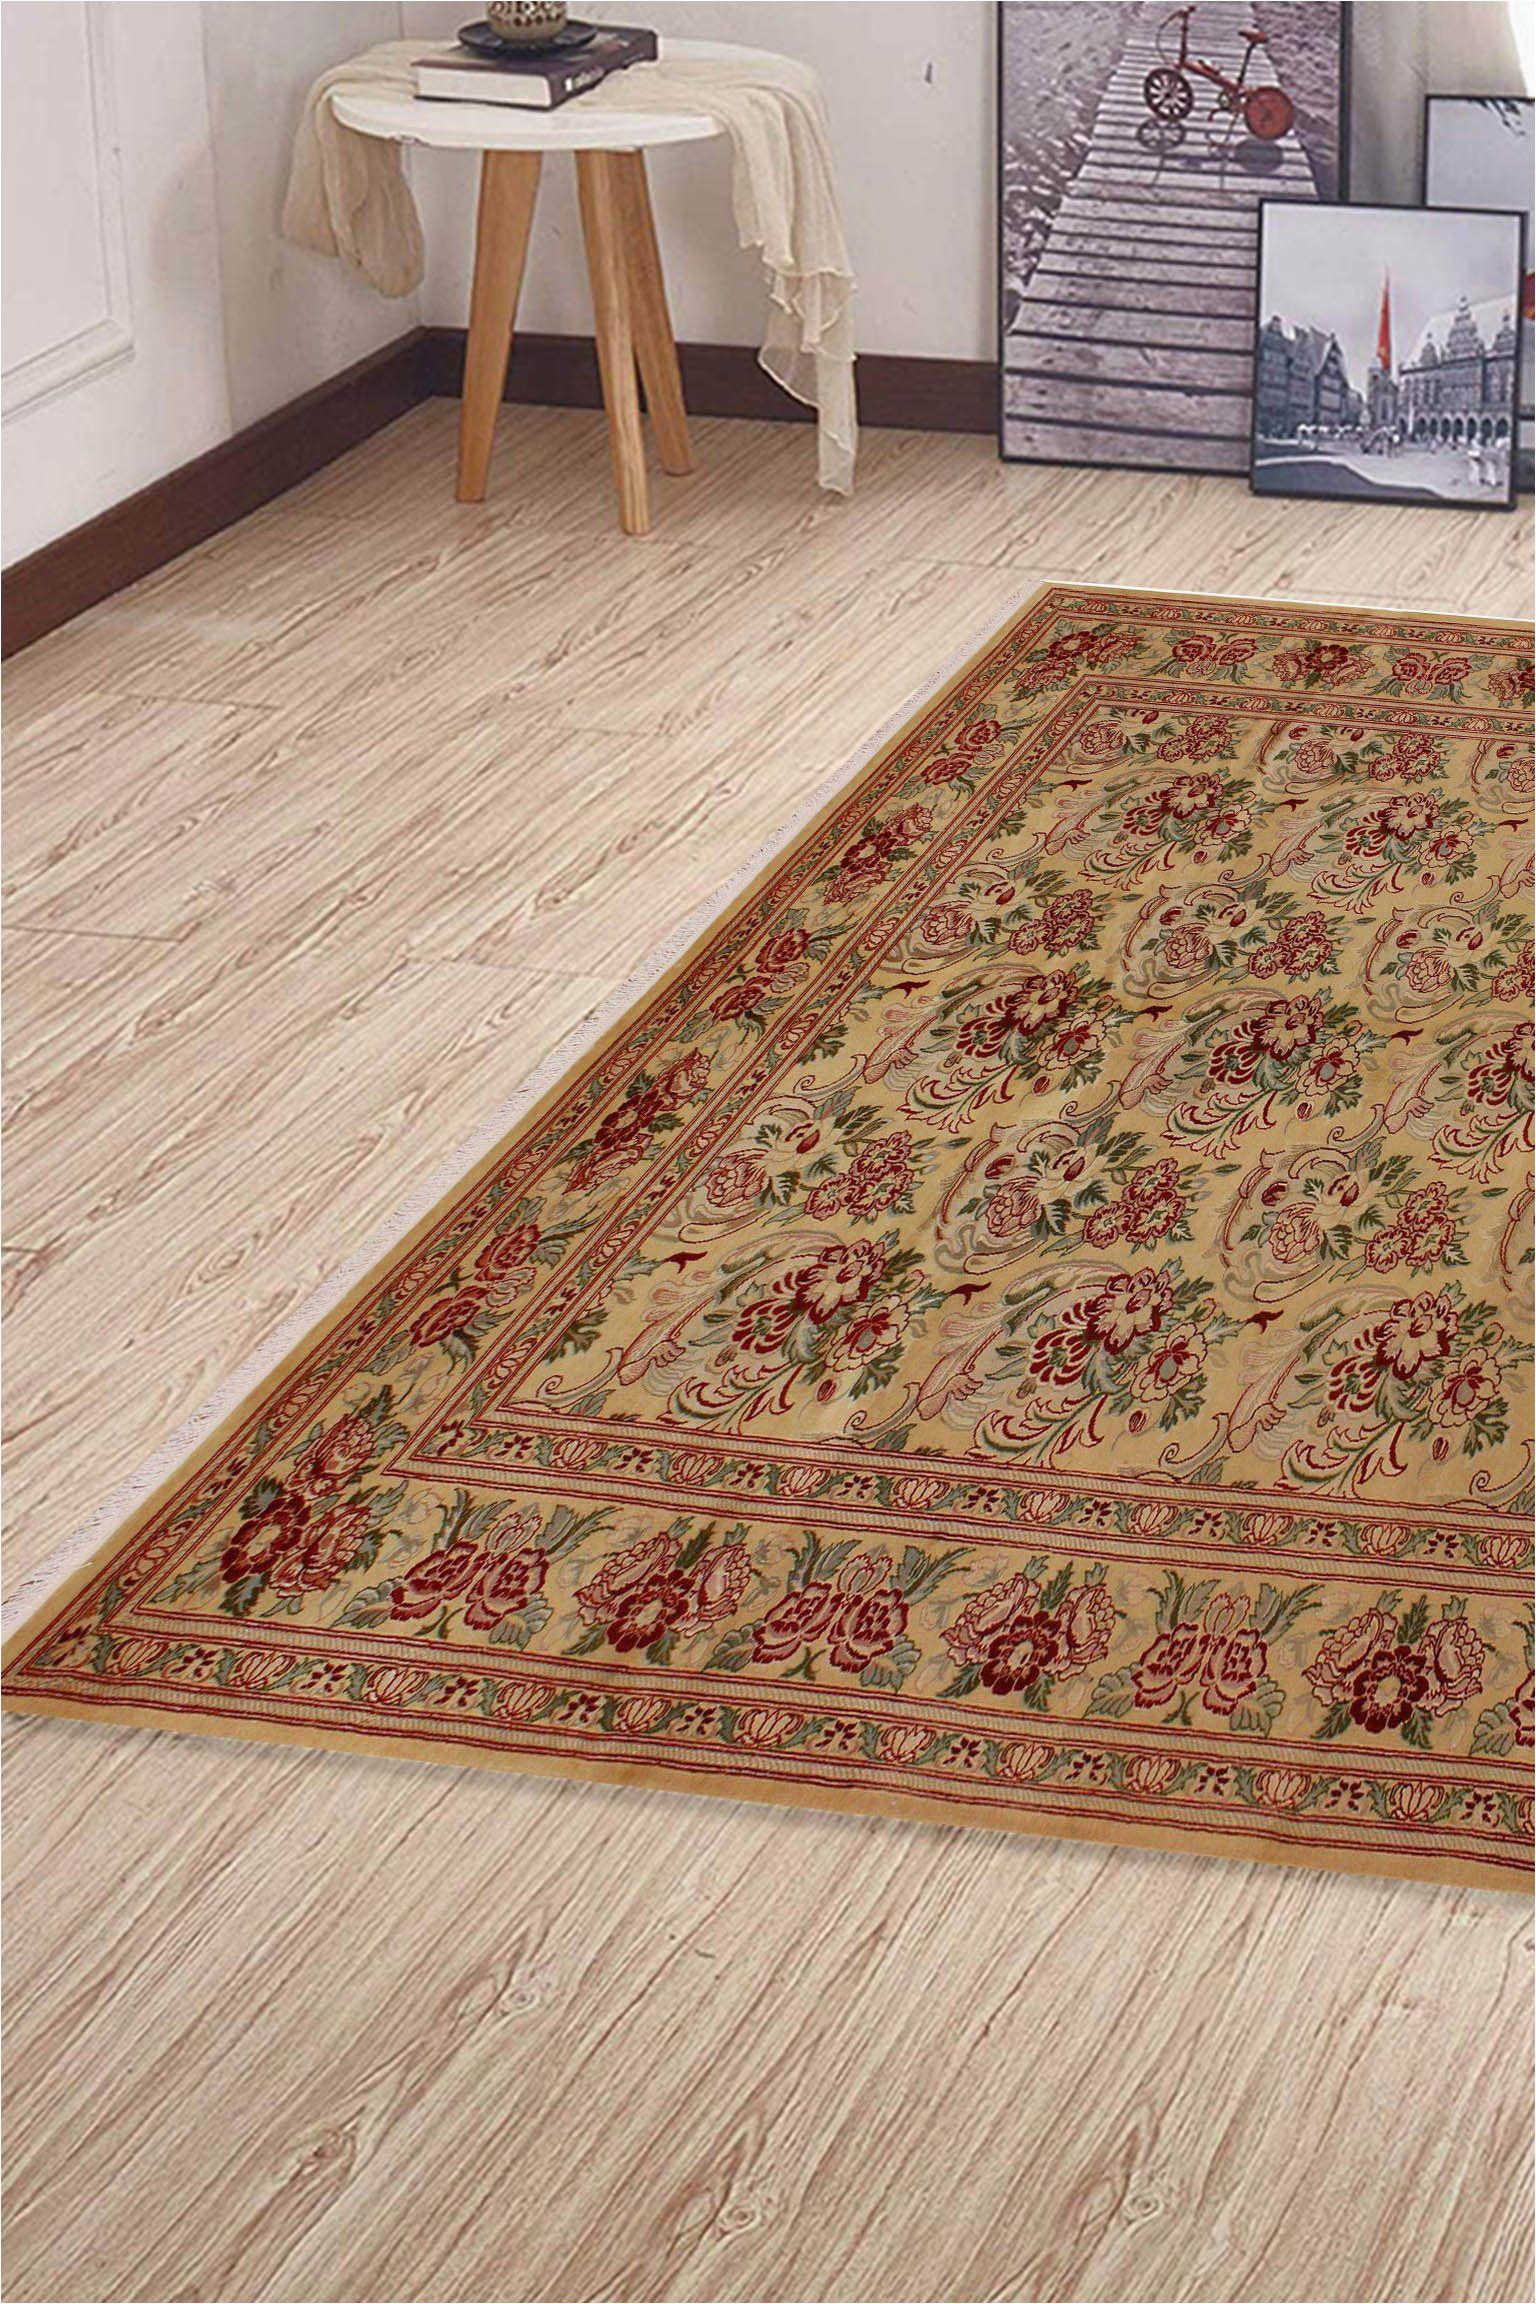 Red and Gold Bathroom Rugs 8 X 10 Gold Red Pak Persian Rug